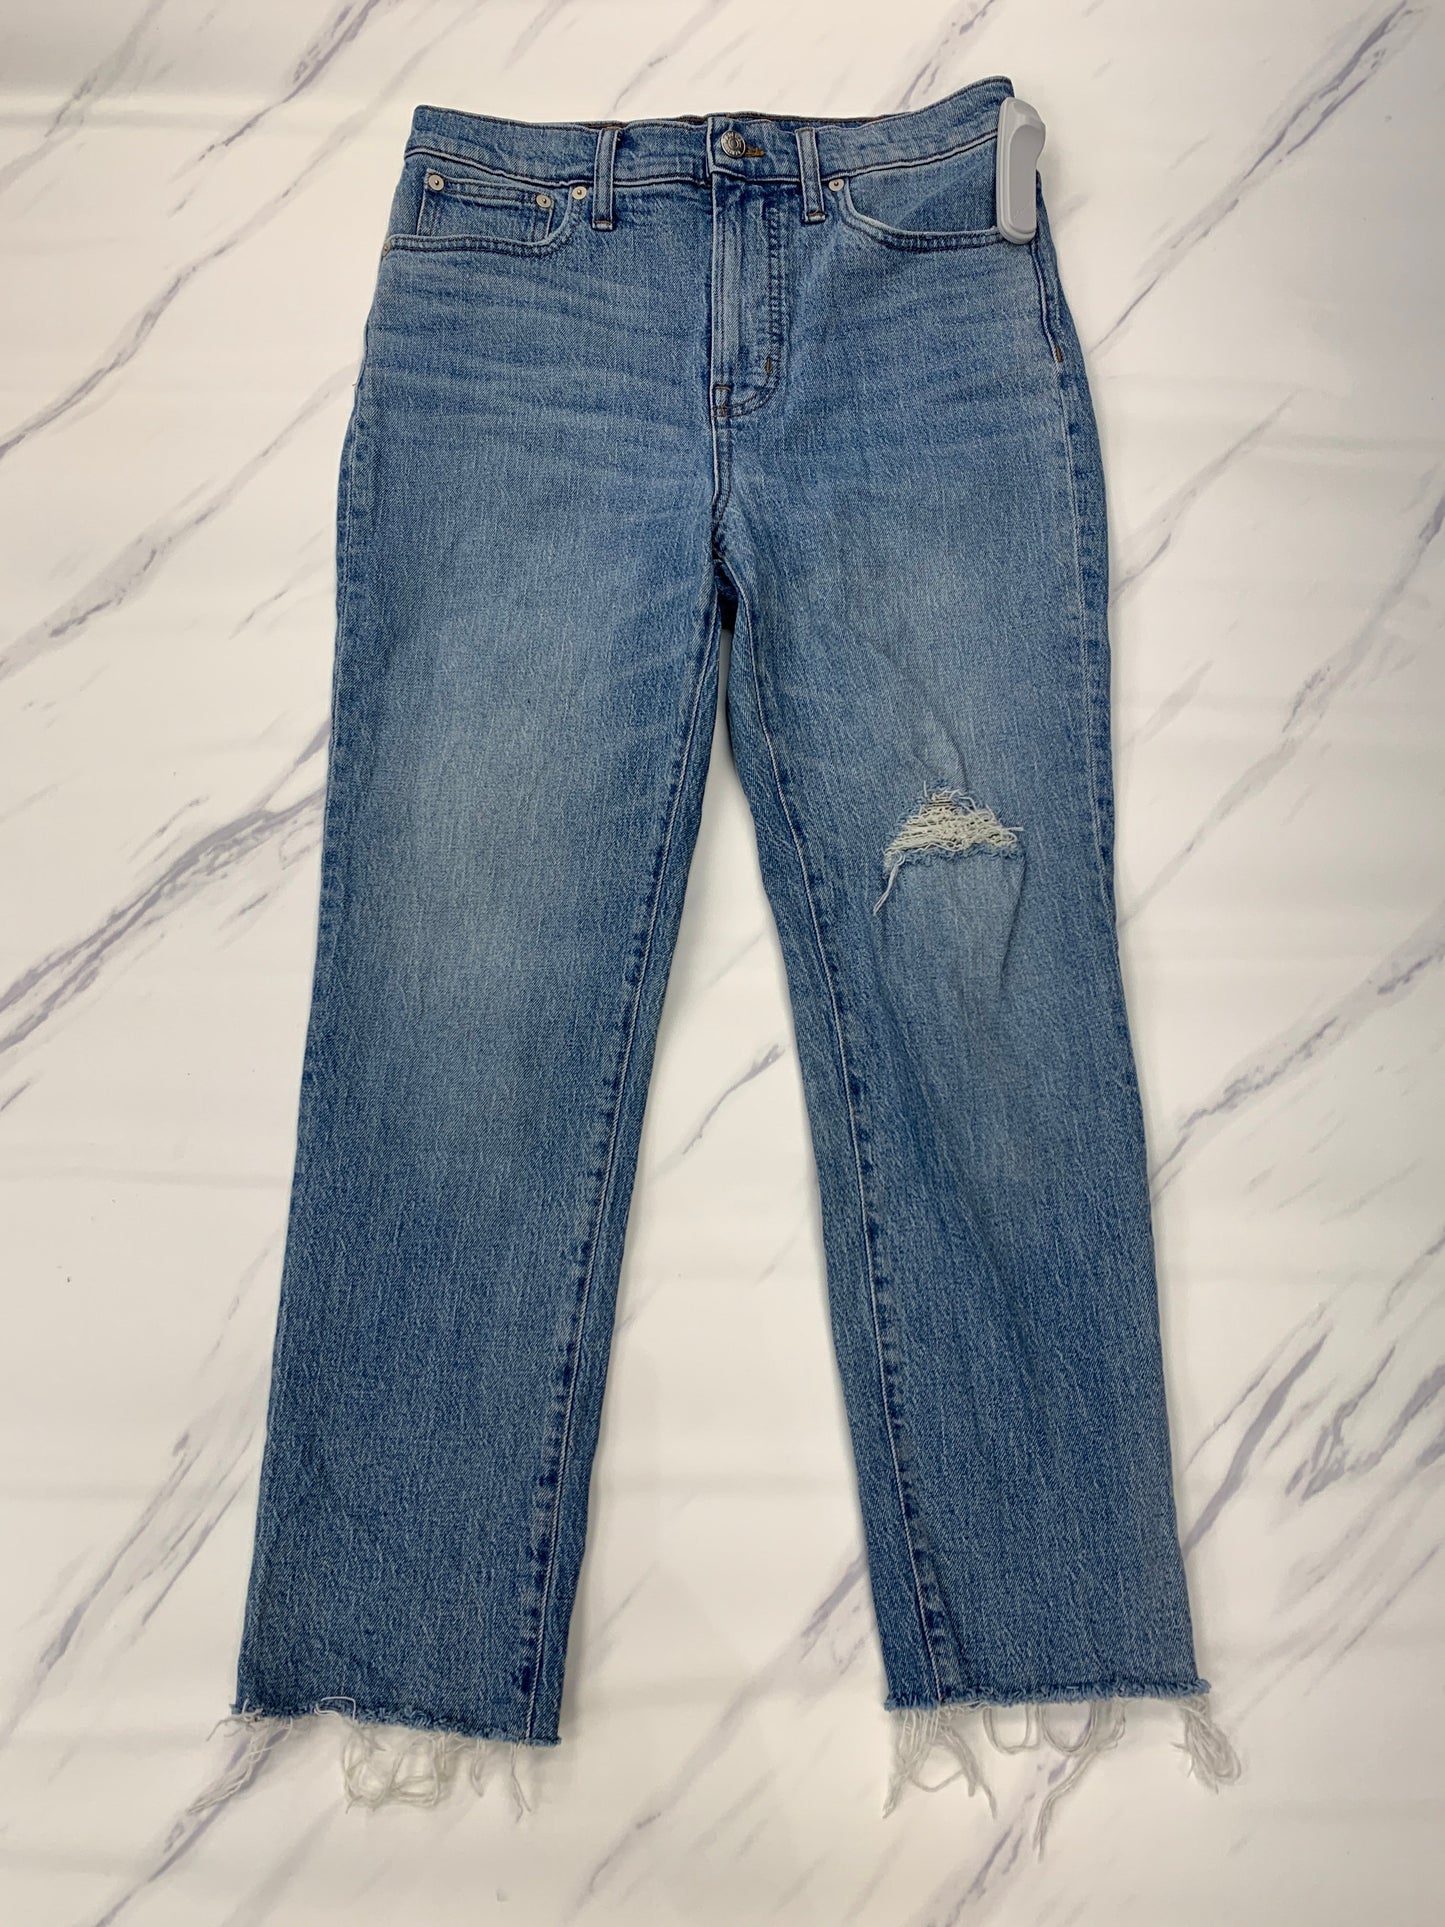 Jeans Straight Madewell, Size 6